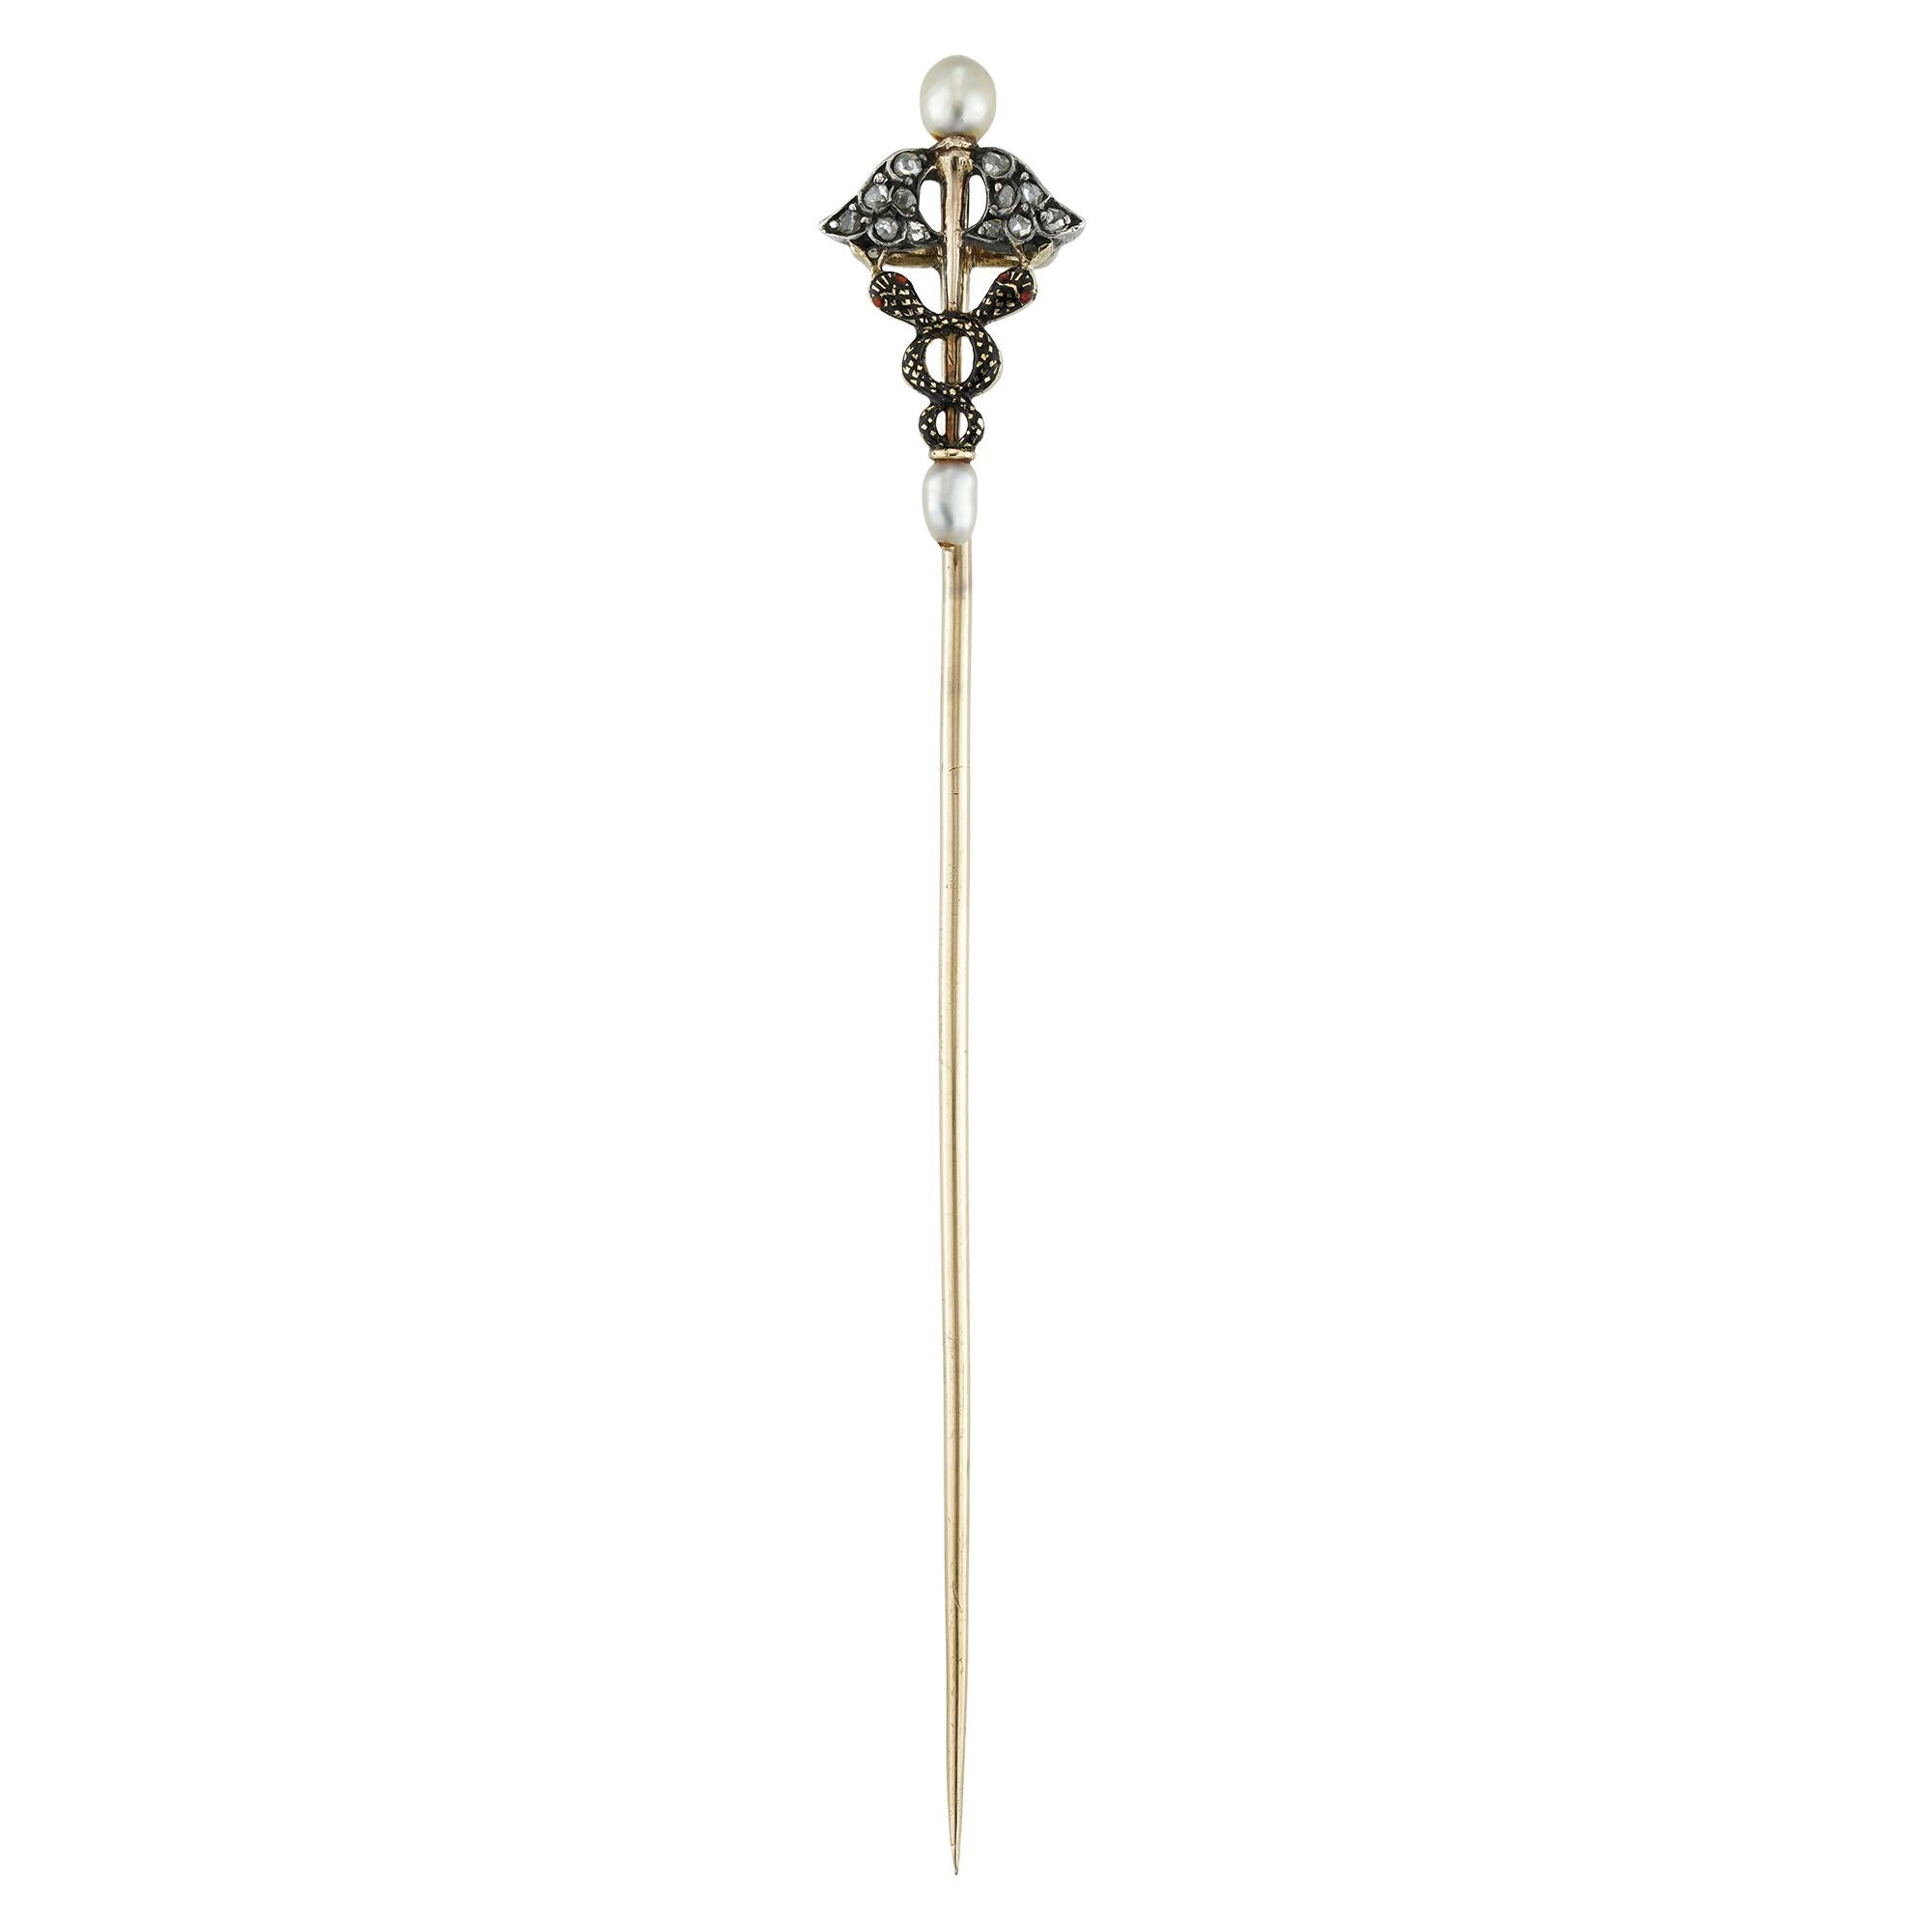 A late Victorian caduceus pearl and diamond stickpin, the two entwined snakes with black enamel decorations, the wings encrusted with rose-cut diamonds, the staff terminating to a pearl on each end, mounted in silver and gold, with gold pin, circa